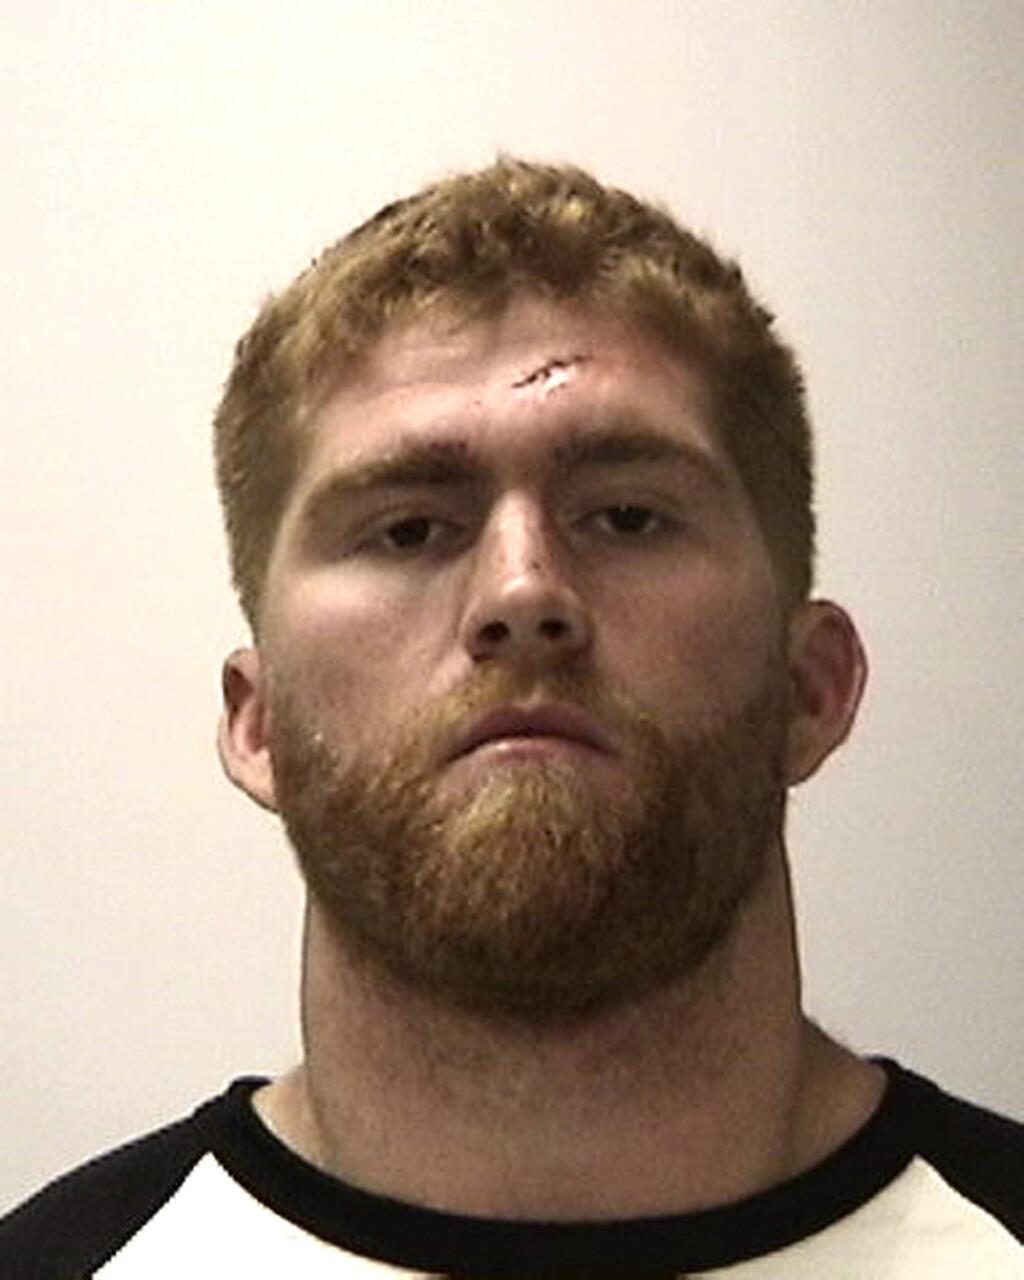 A booking photo provided by the San Francisco Police Department shows San Francisco 49ers fullback Bruce Miller. The 49ers released Miller on Monday, just hours after he was arrested for assaulting two men. Miller was charged with aggravated assault, elder abuse, threats and battery after an early-morning fight at a San Francisco hotel, according to the San Francisco Police Department. Miller was booked into county jail. (San Francisco Police Department via AP)